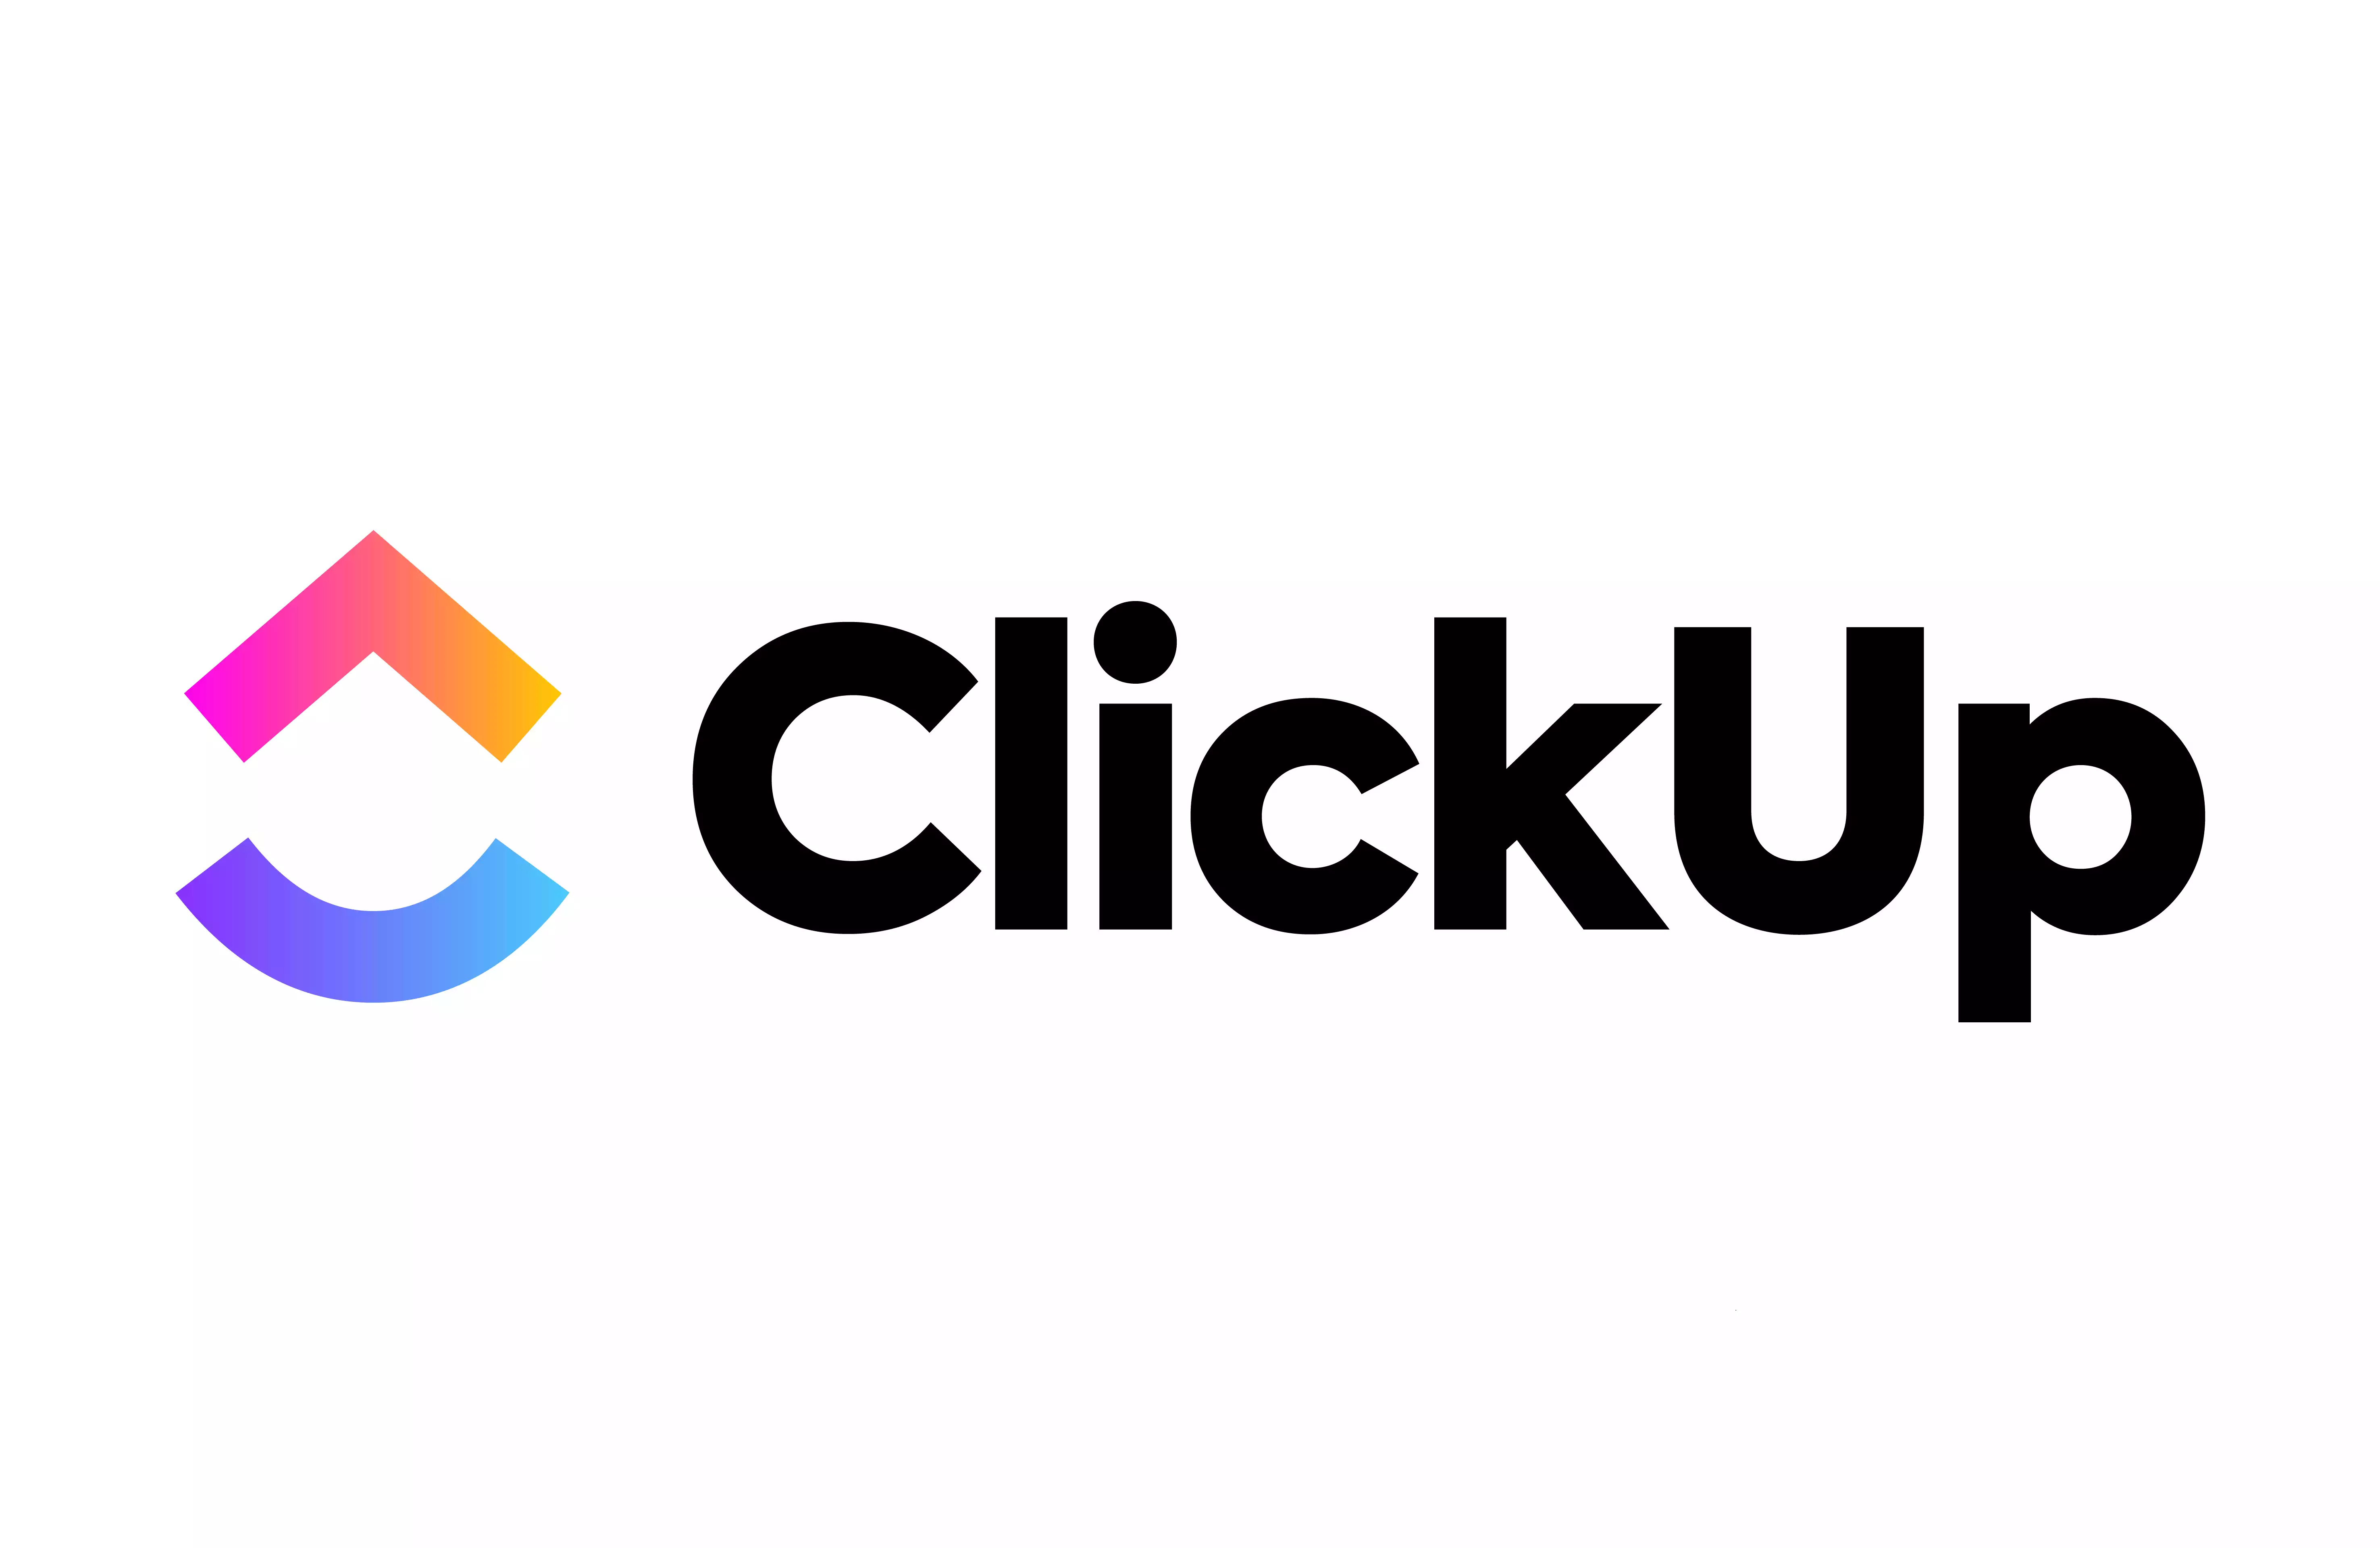 Why Go With ClickUp?